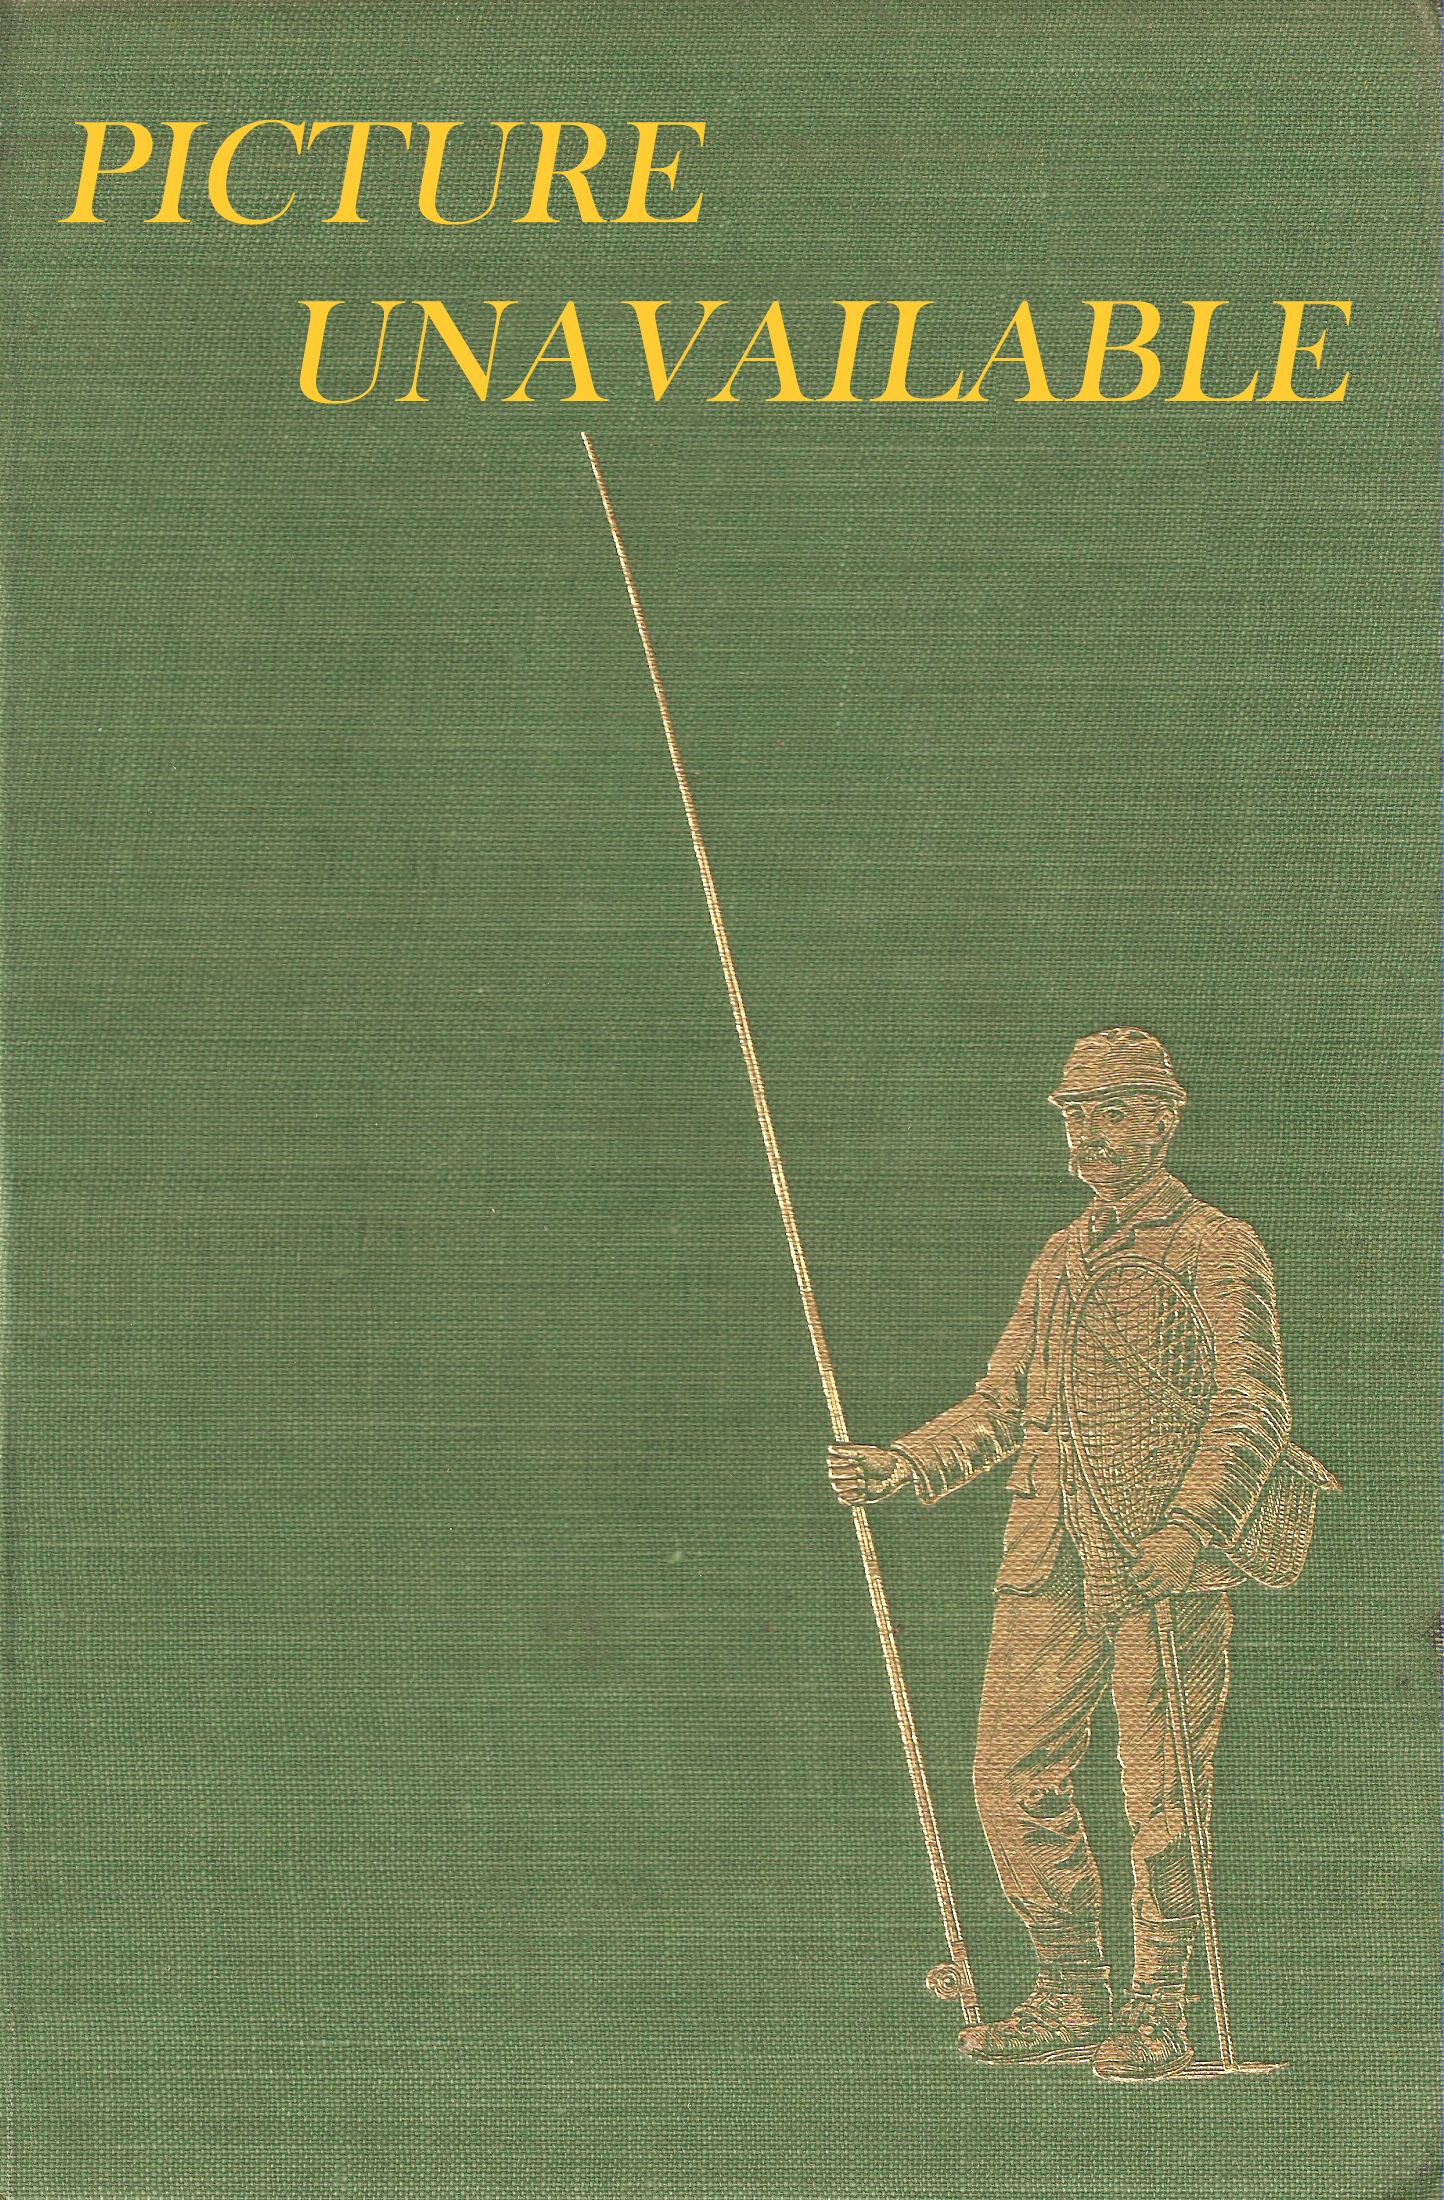 THE HISTORY OF THE LONDON ANGLER'S ASSOCIATION. (With an occasional note  concerning its members and clubs). By W.G. Callcut.